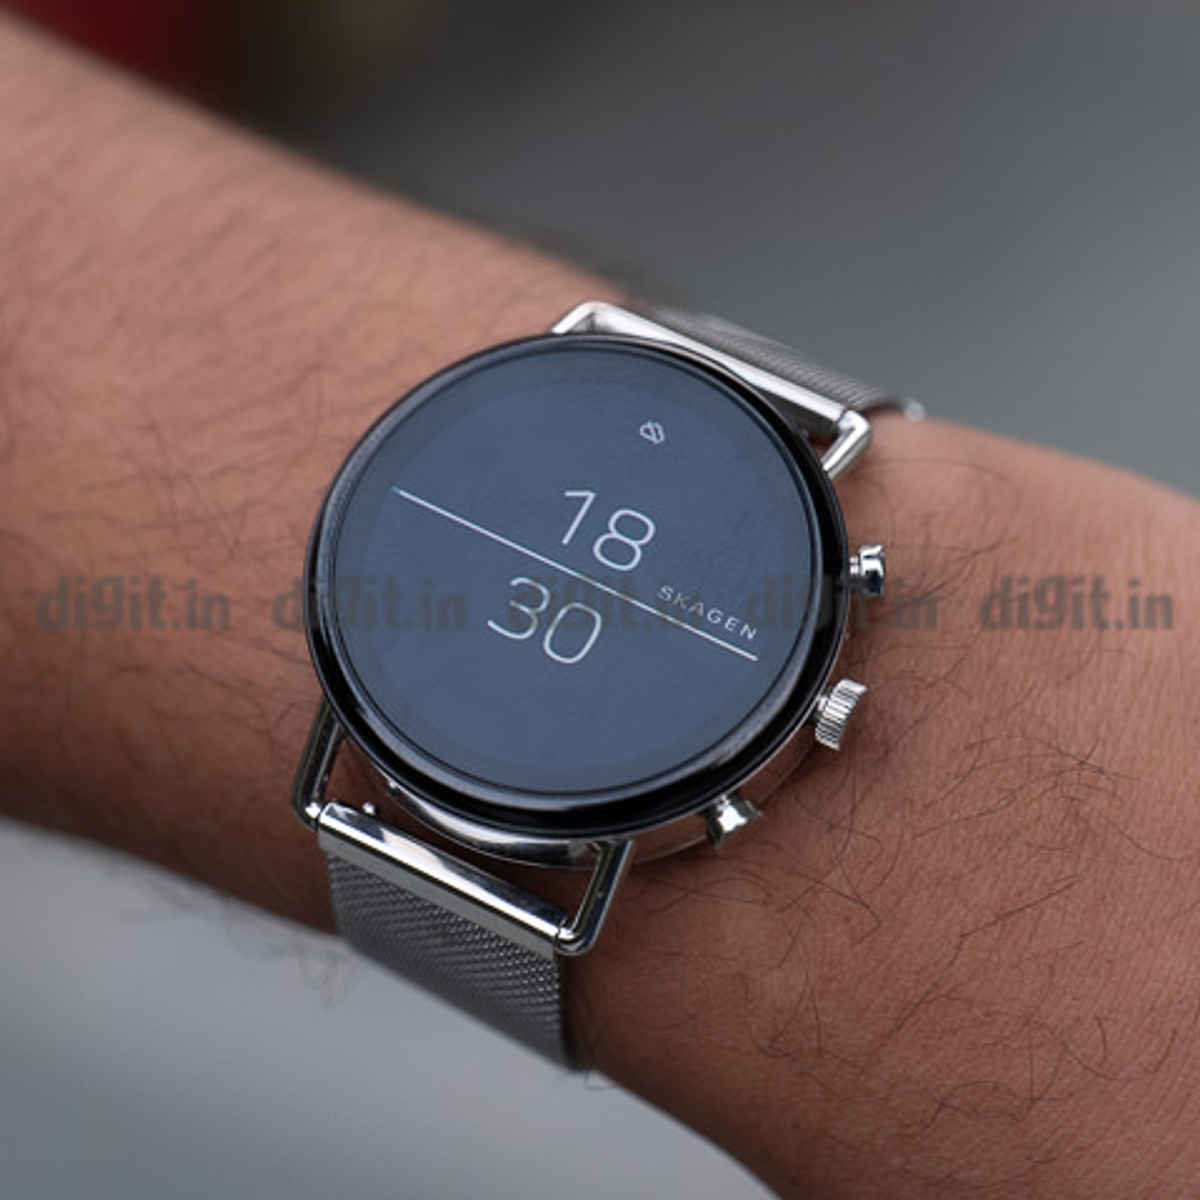 Skagen Falster 2 Review: Smart, and more